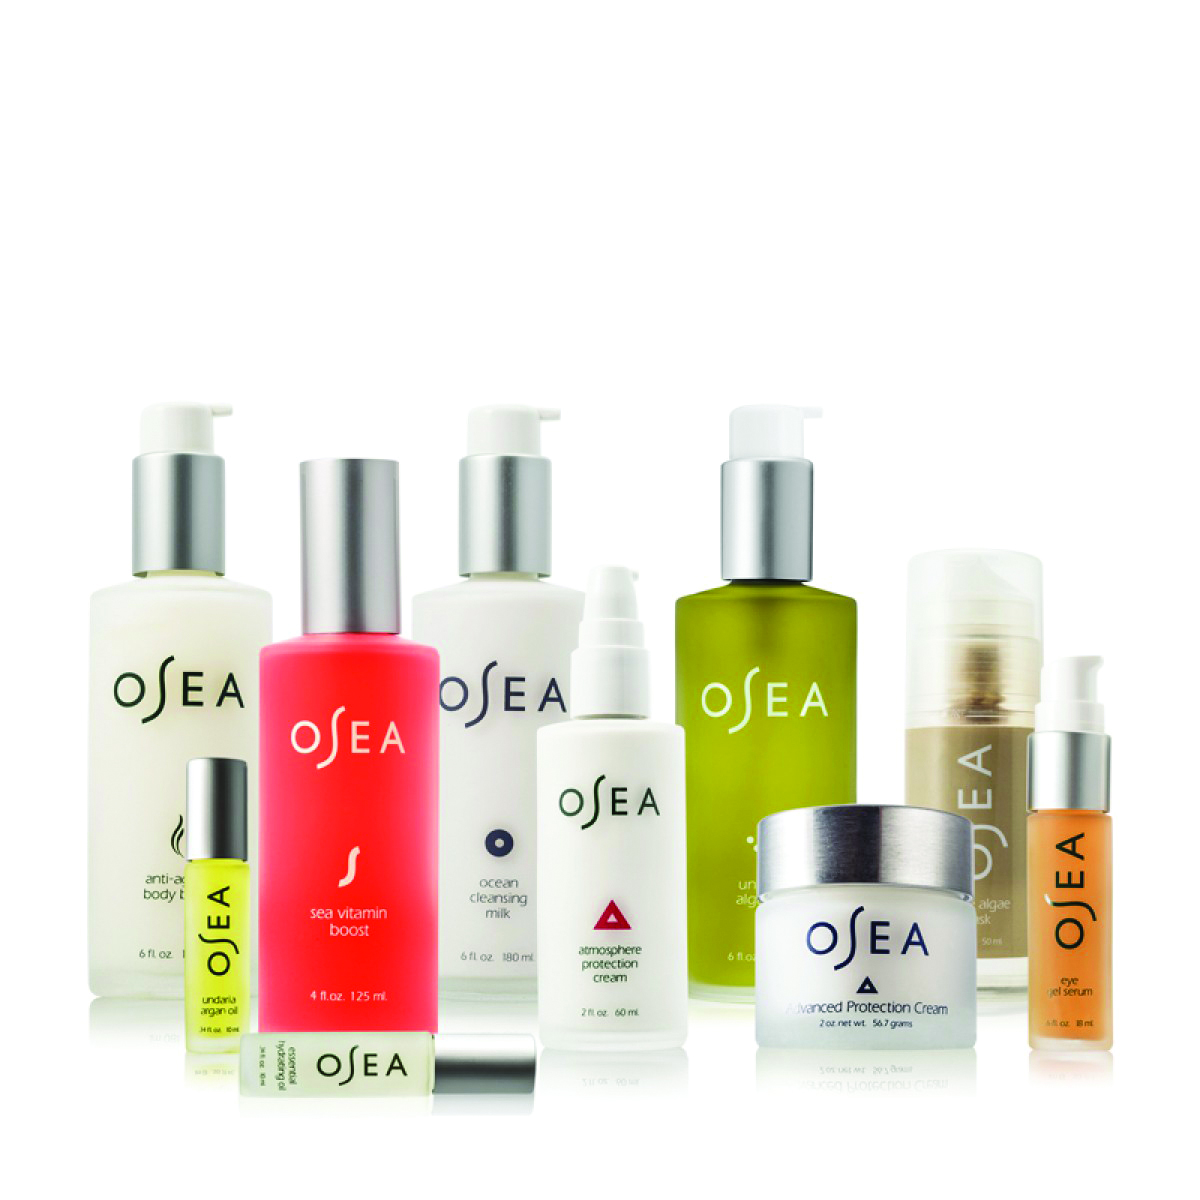 Organic, Effective Skincare at the Spa and at Home